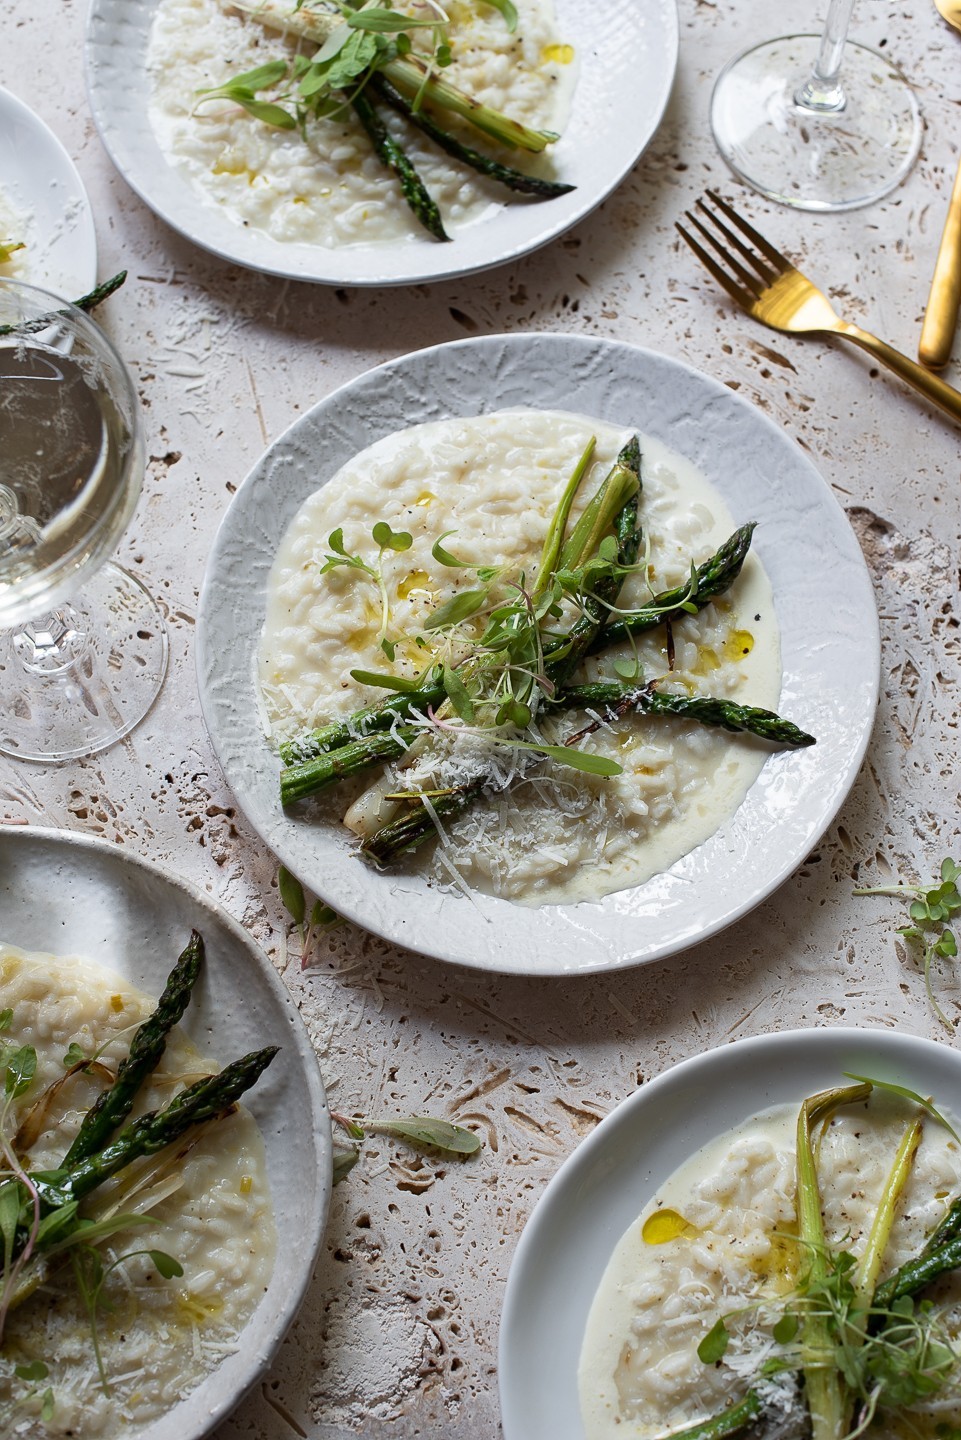 Charred leek and asparagus risotto